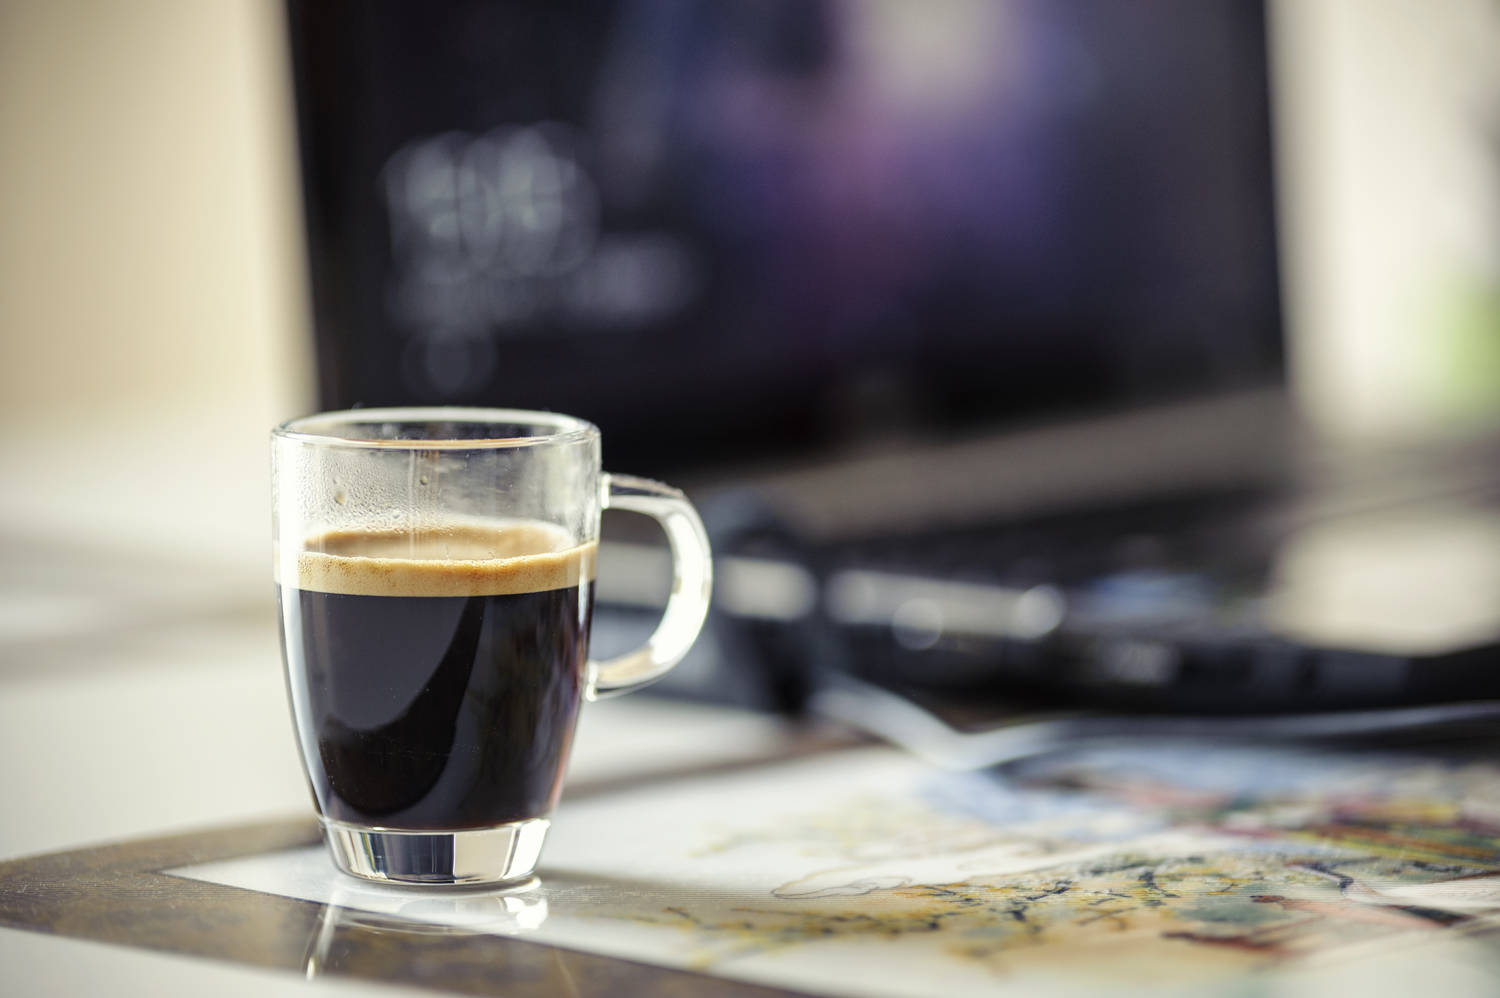 Internal Advisors in your organisation – double espresso or caffeine-free?